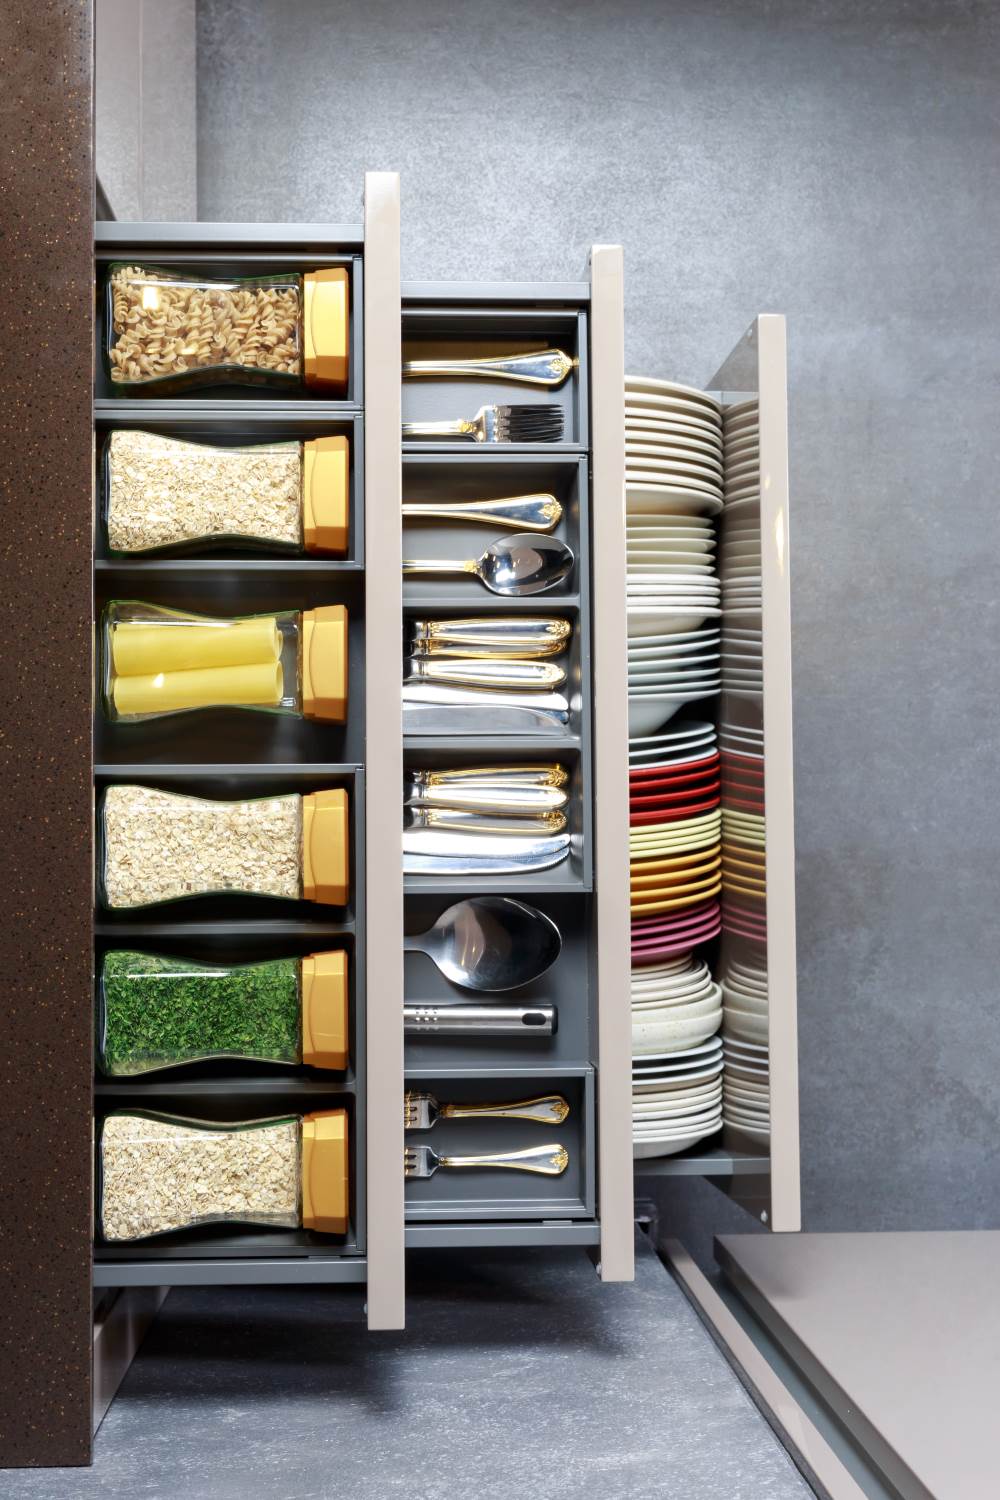 Organized Bottles and Classified Utensils in a Kitchen Drawer